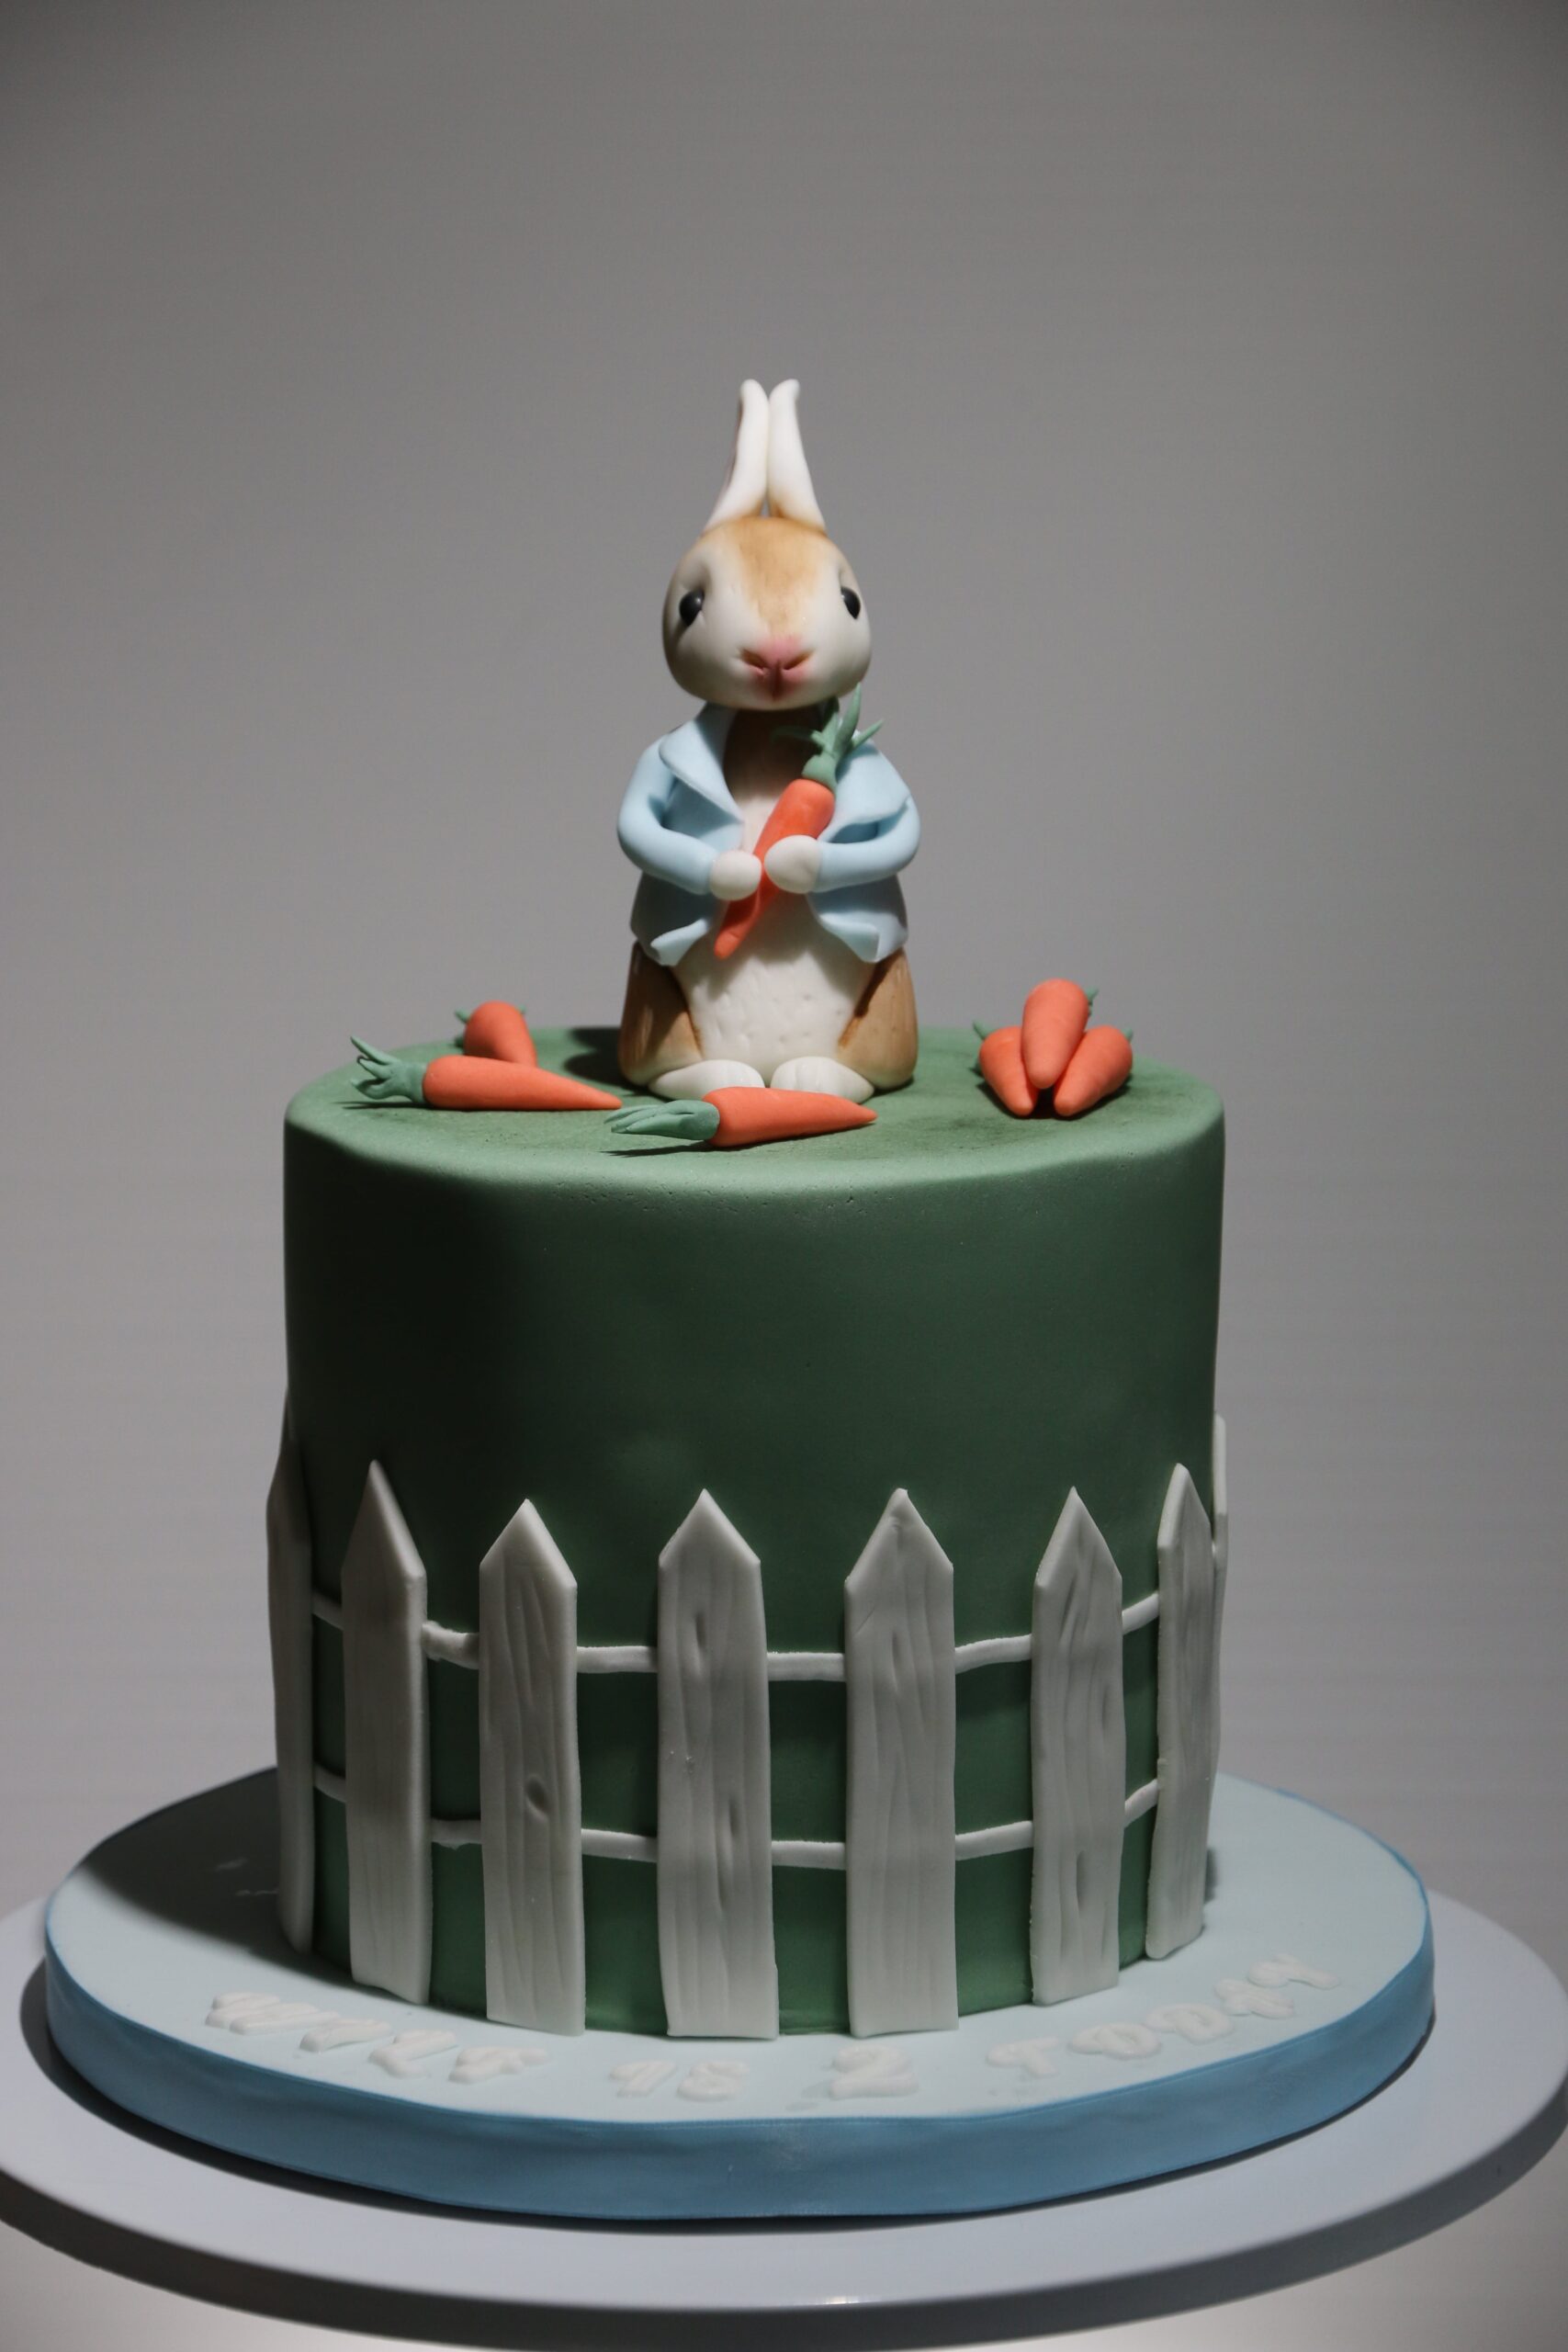 Peter Rabbit eating carrots on top of a green coloured cake surrounded by a picket fence